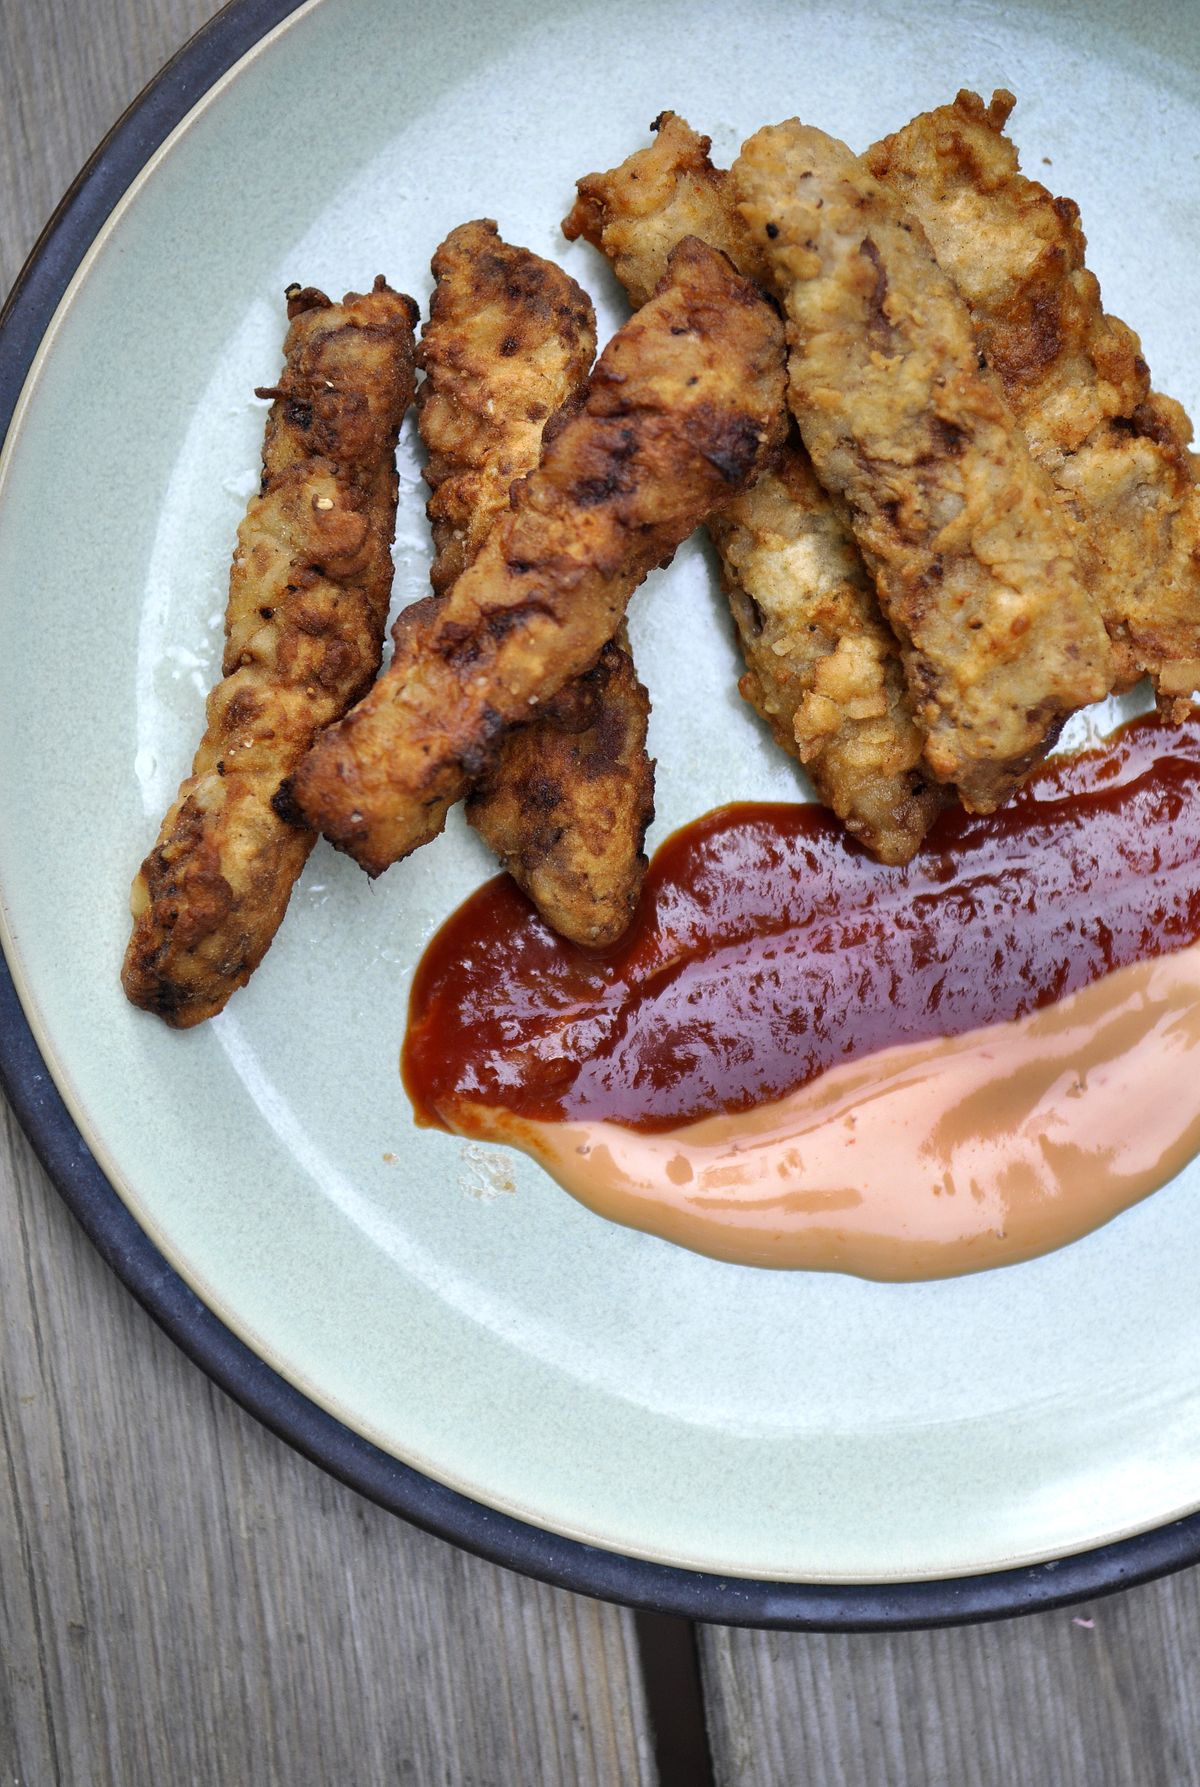 Cocktail sauce and fry sauce complement this batch of finger steaks, homemade by Shawn Vestal. (Adriana Janovich)